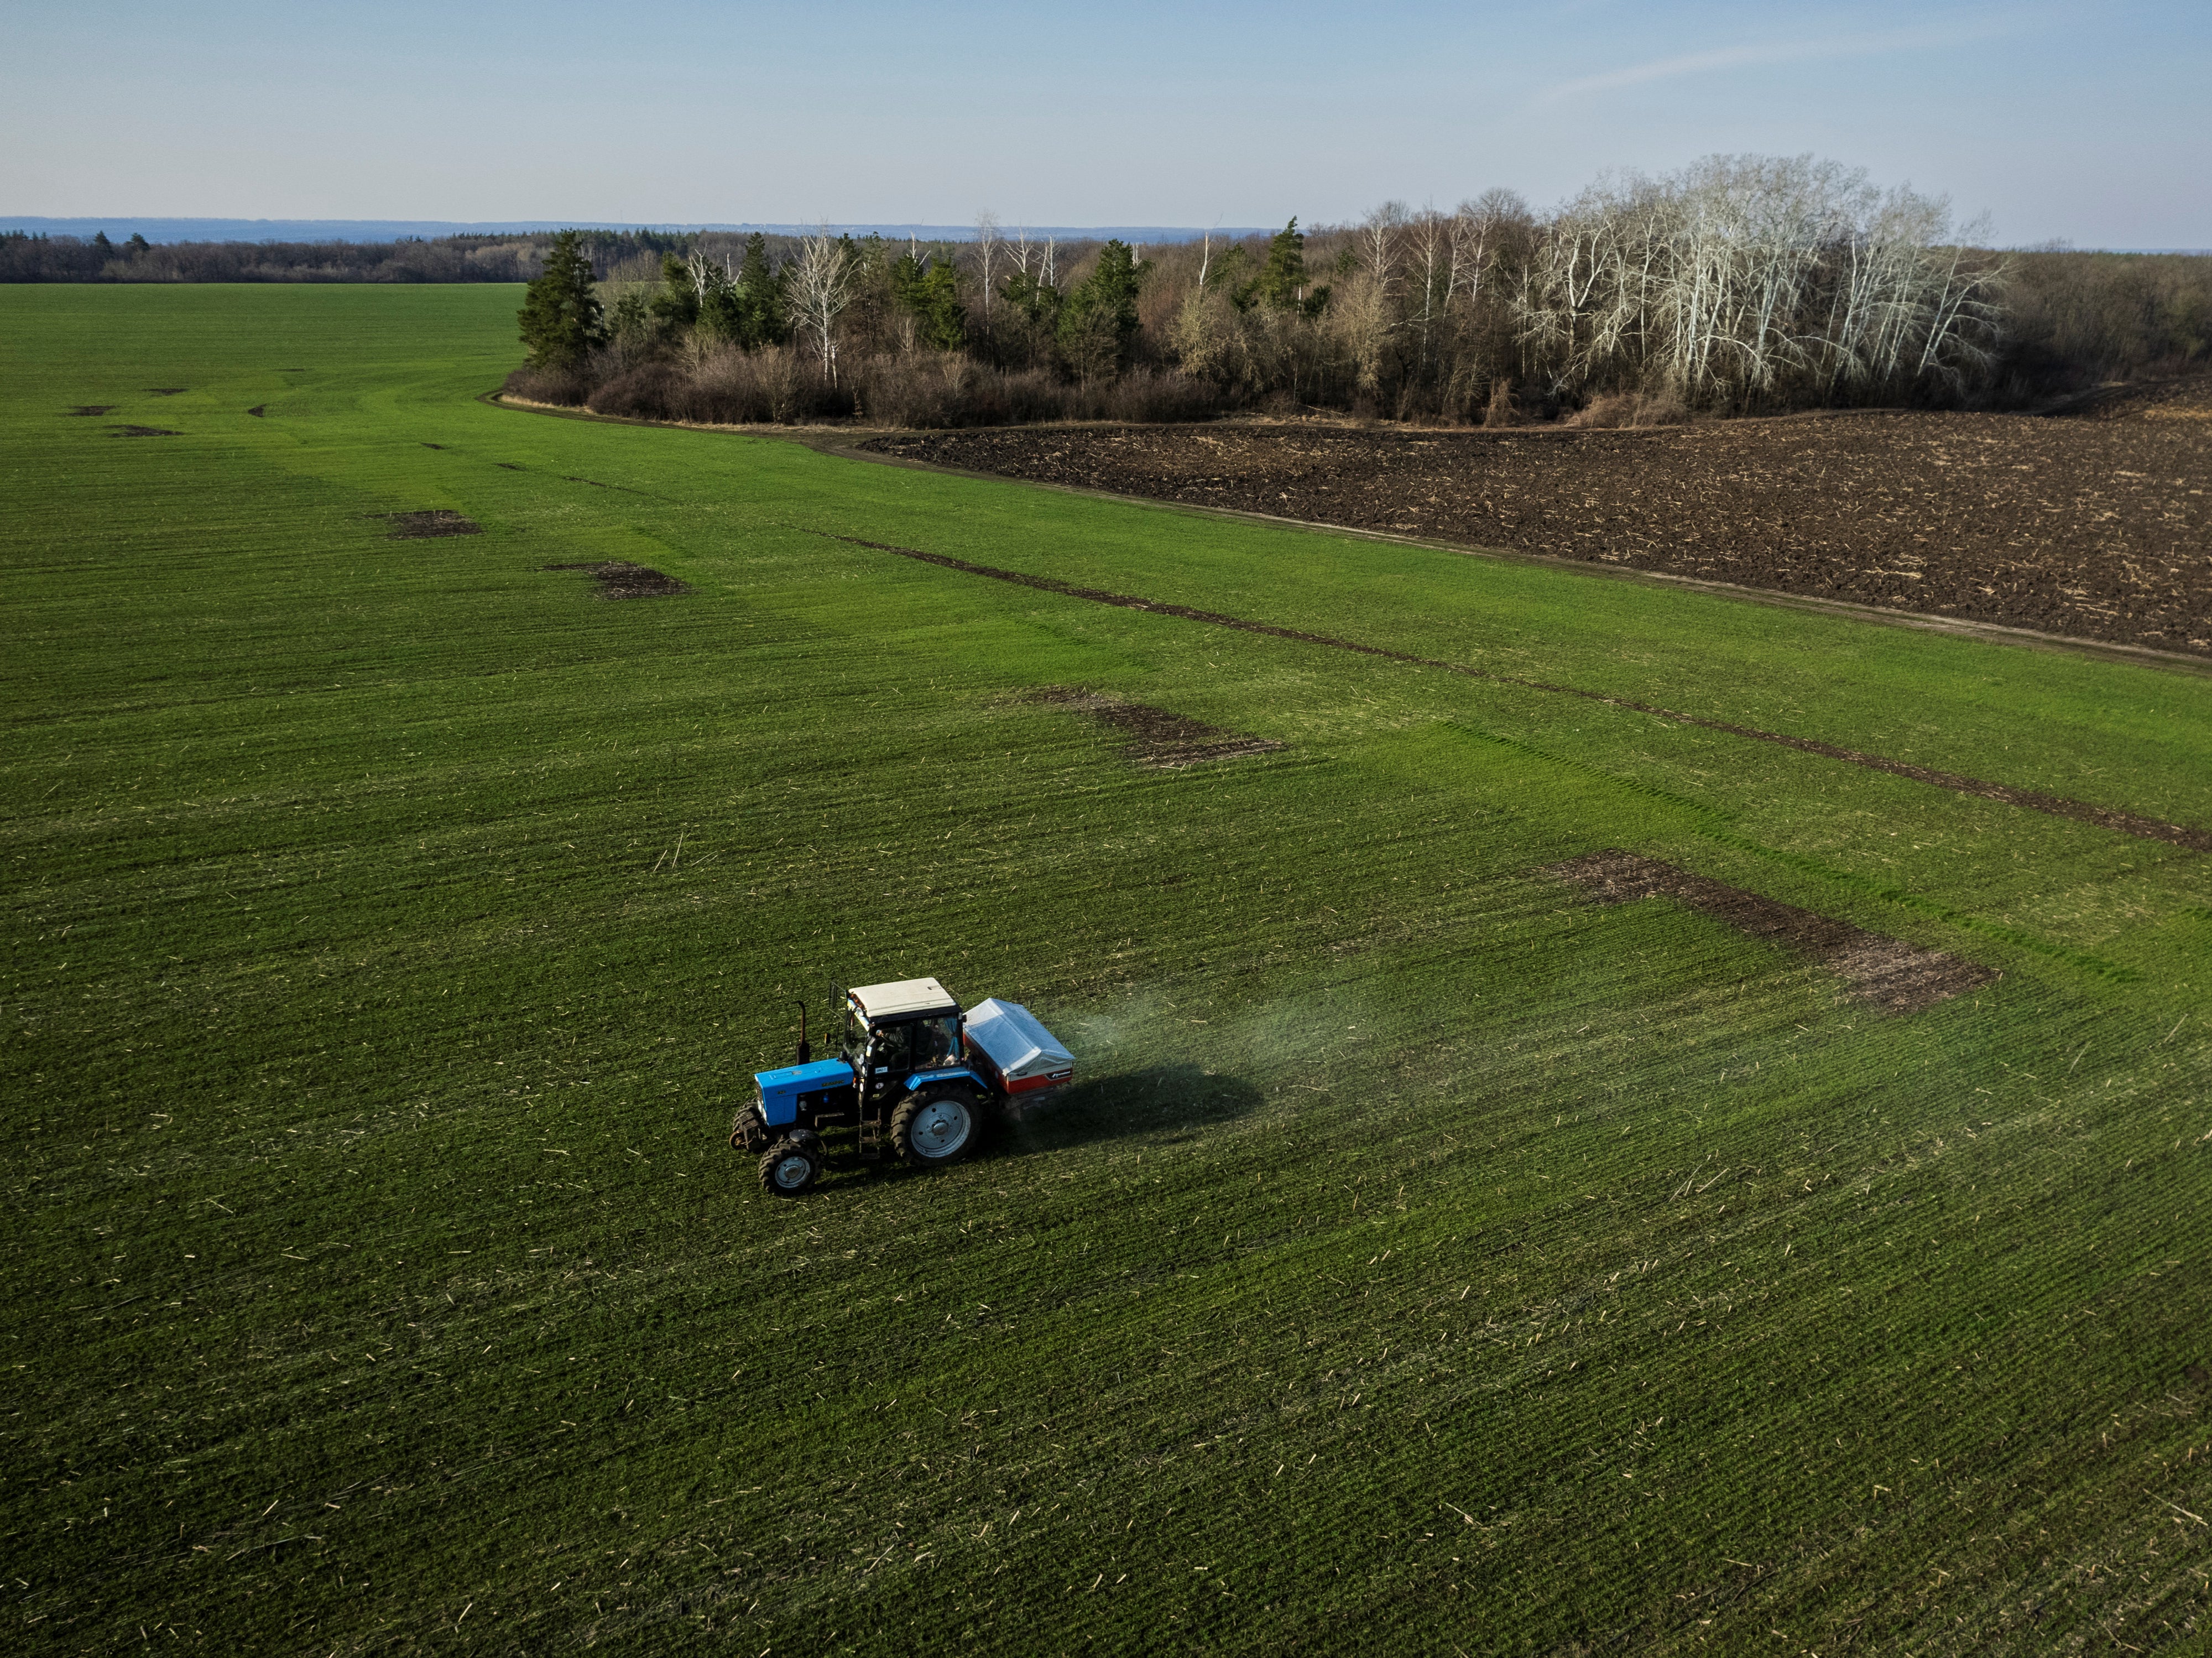 An aerial view shows a tractor spreading fertiliser on a wheat field near the village of Yakovlivka after it was hit by an aerial bombardment outside Kharkiv on 5 April